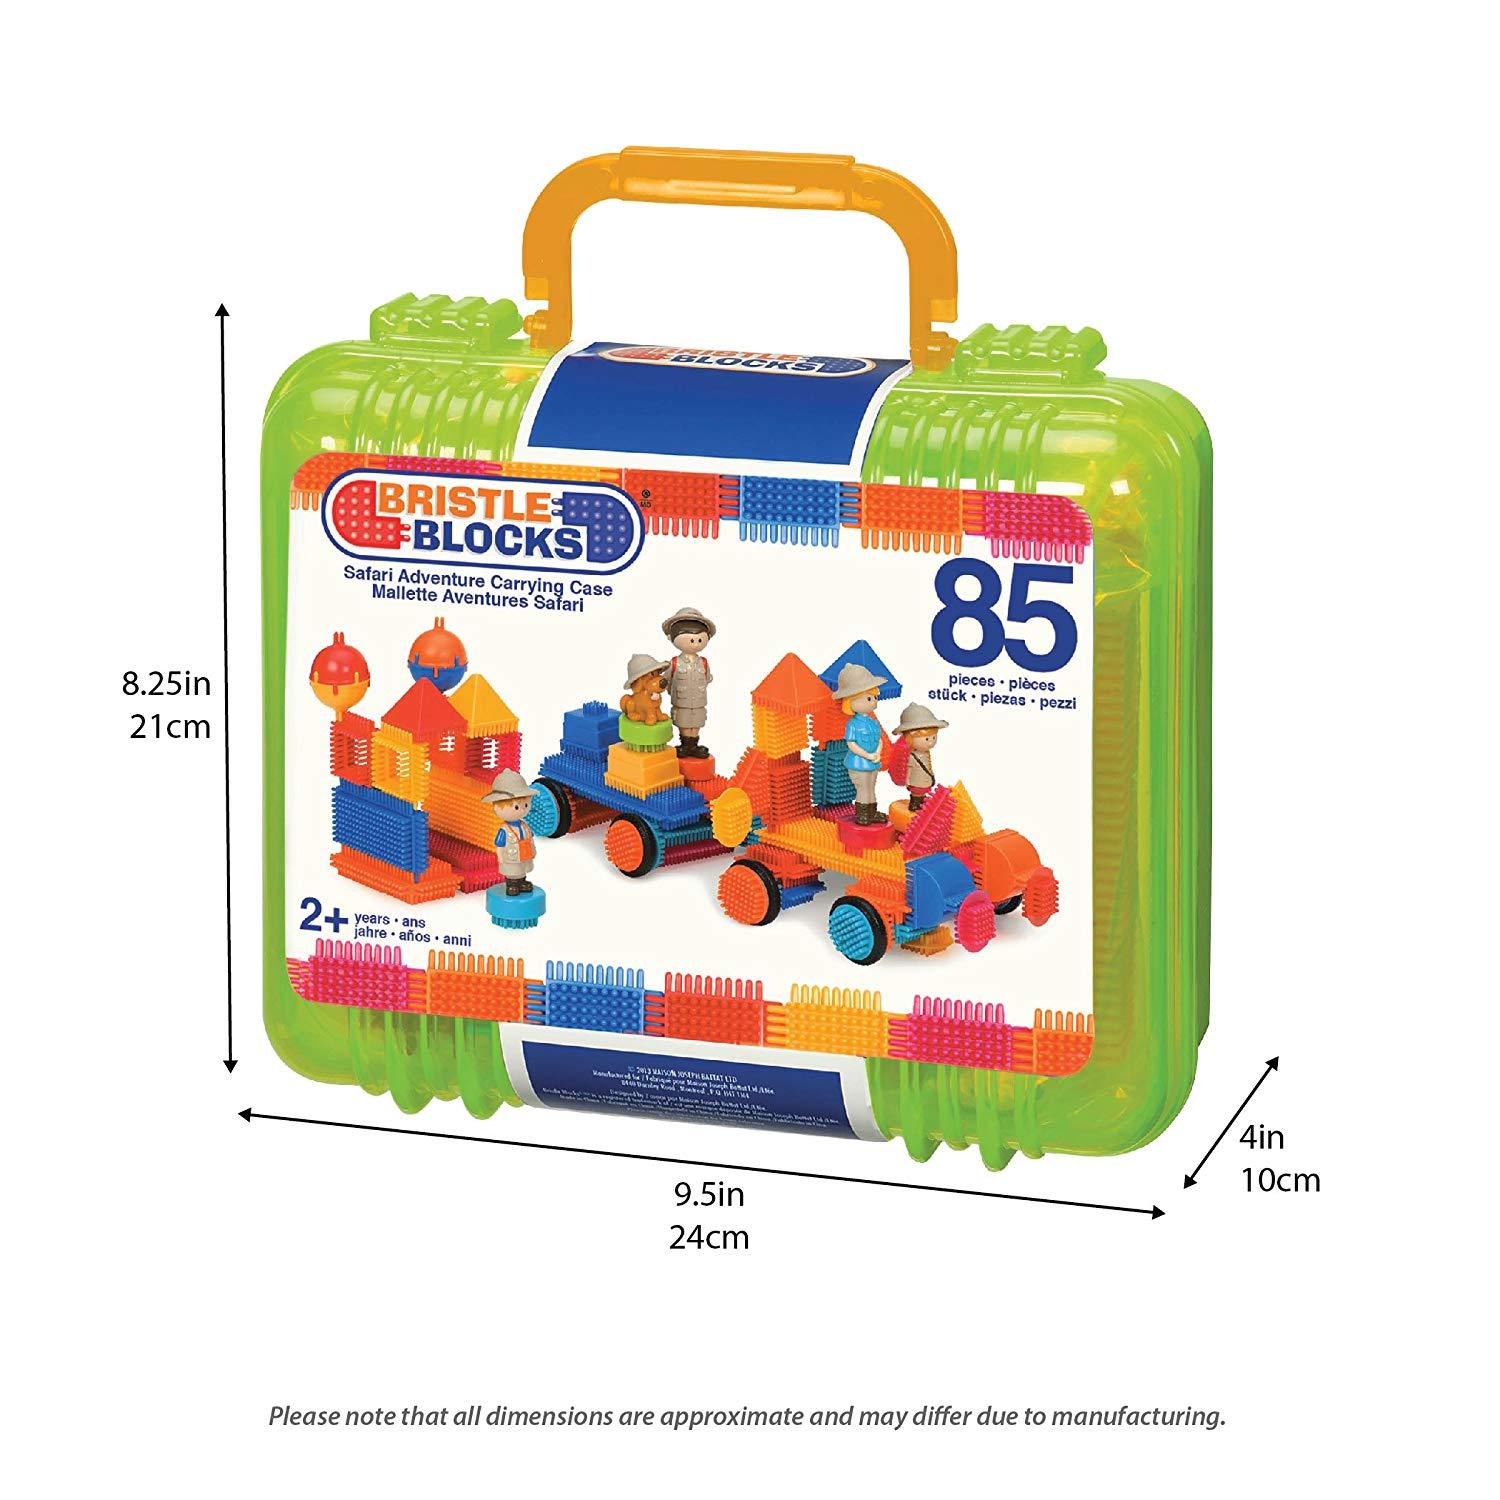 Bristle Blocks by Battat – The Official Bristle Blocks – 85 Pieces in a Carry Case – STEM Creativity Building Toys for Dexterity and Fine Motricity – BPA Free 2 years +, multi (3073Z) - image 4 of 5